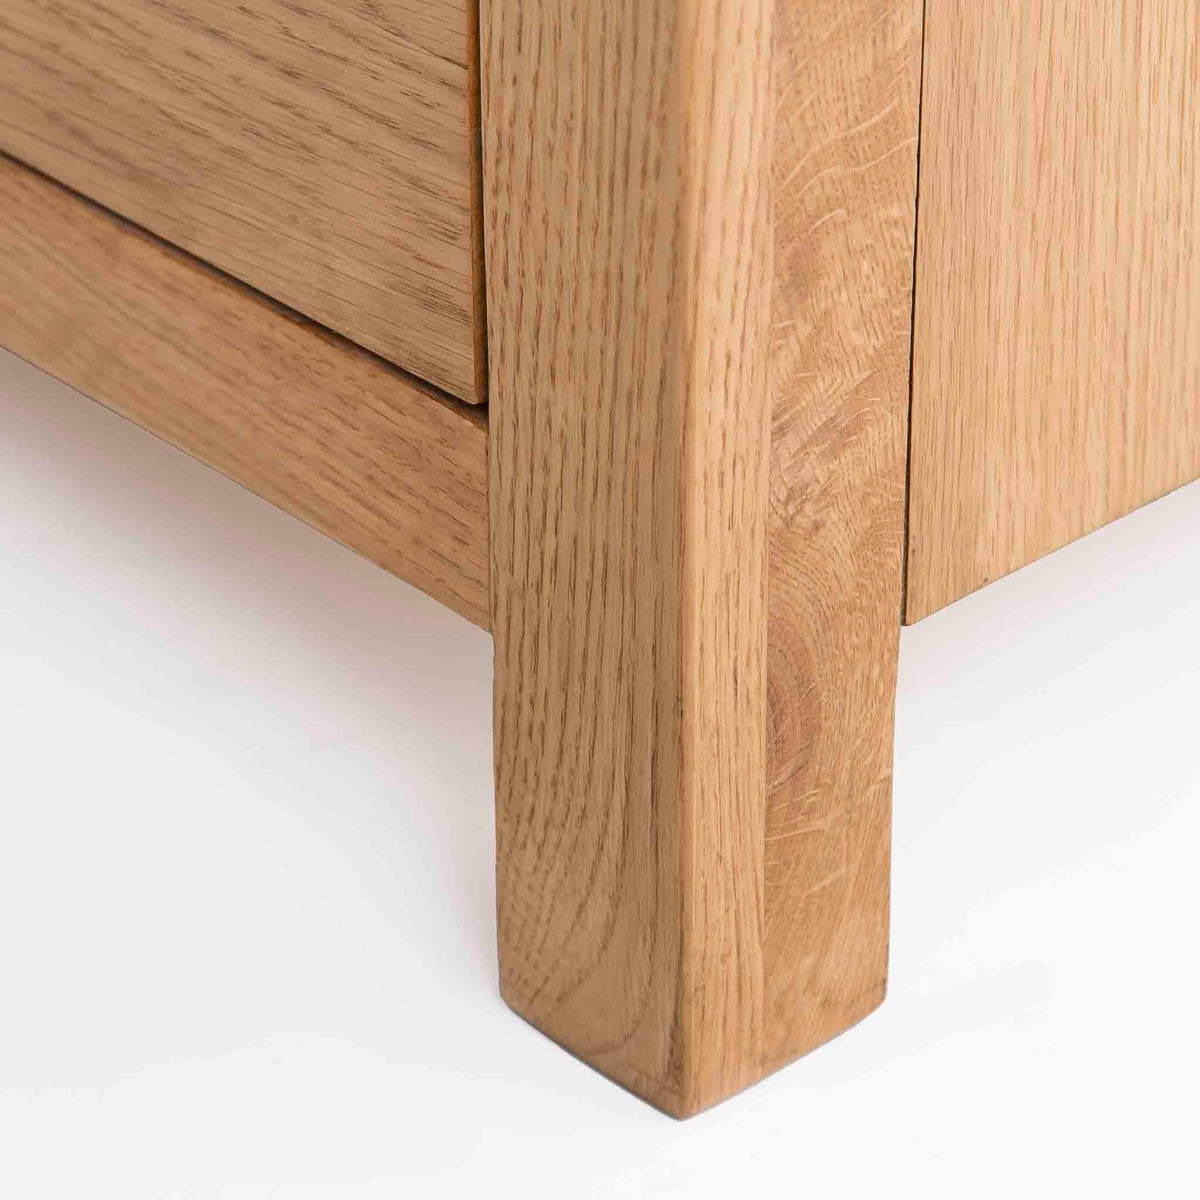 Surrey Oak waxed 5 drawer wide chest - Close Up of foot